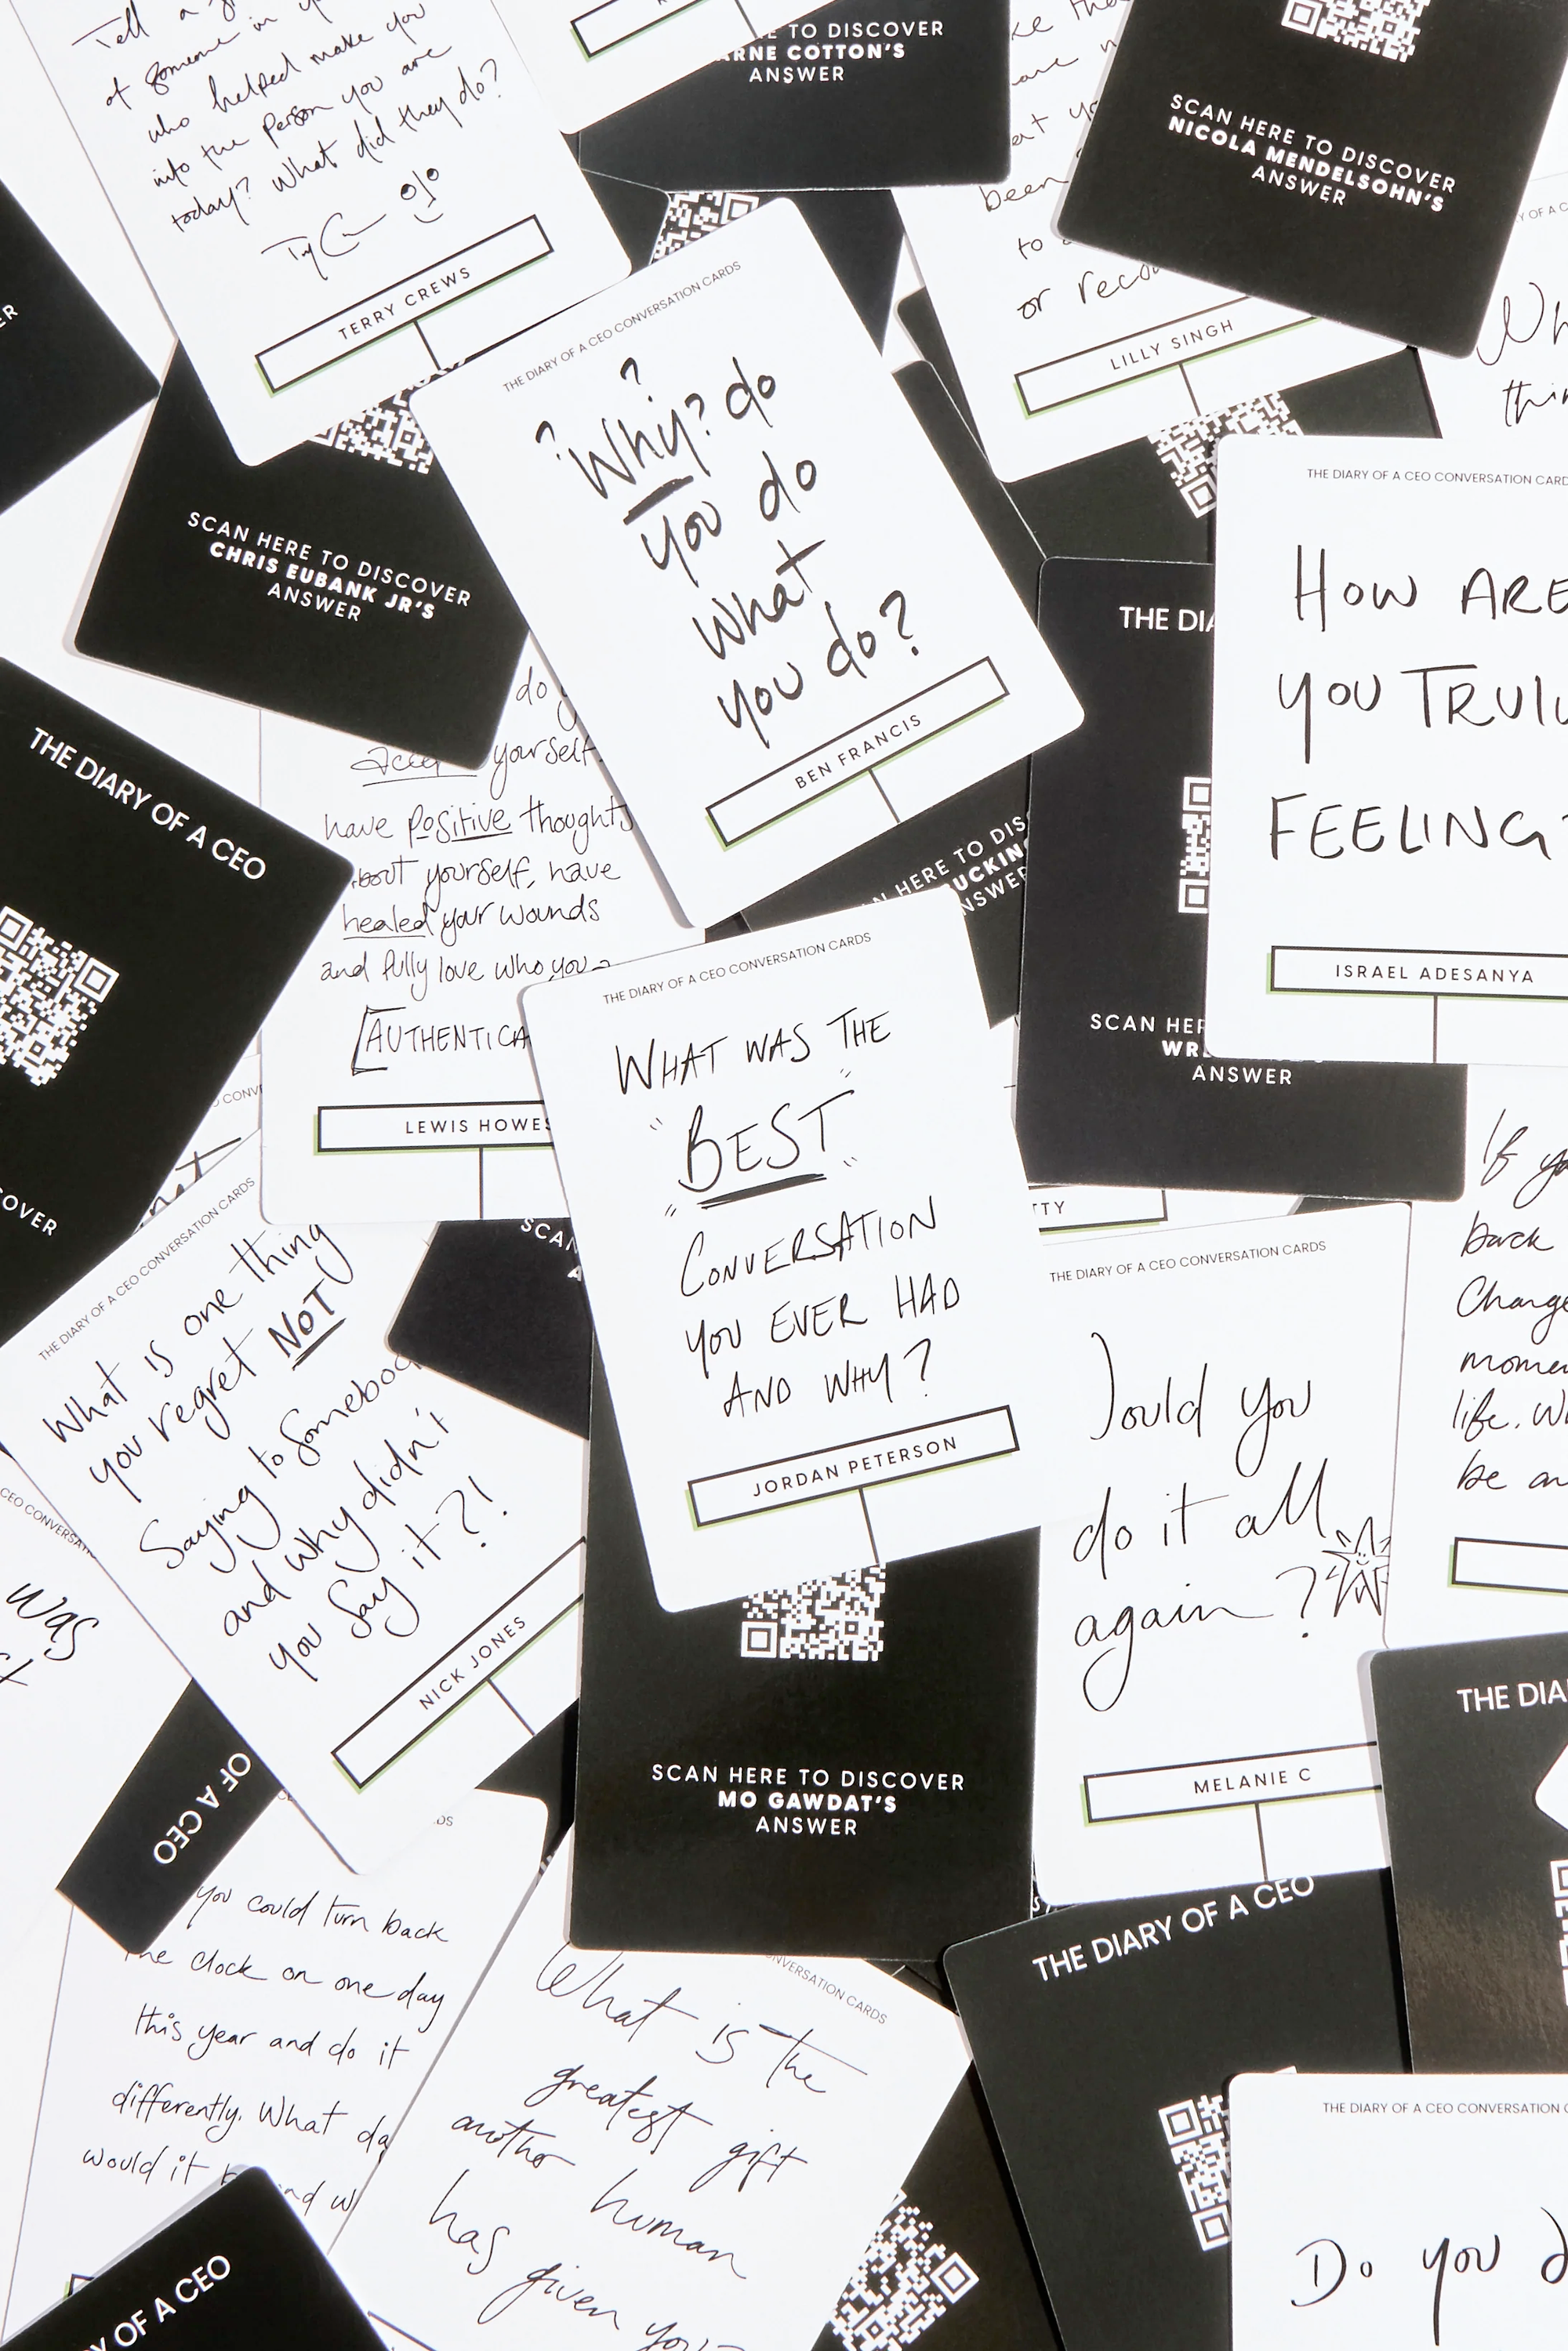 A bunch of the Diary of a CEO Card Deck cards scattered on a table. You can see how each card question is written in someone’s unique handwriting.